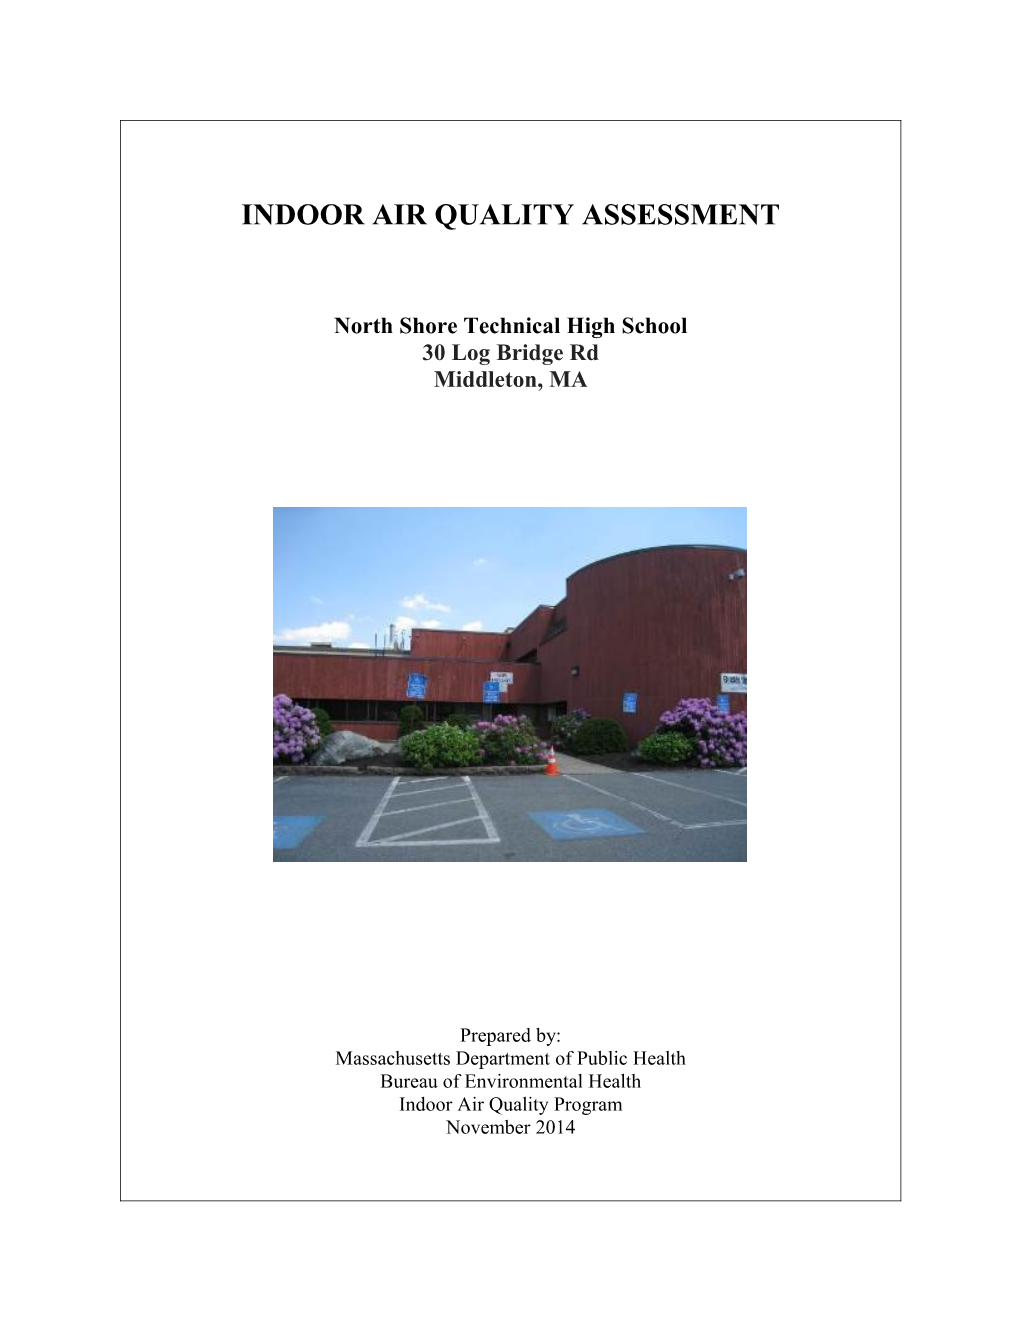 Indoor Air Quality Assessment - North Shore Technical High School, Middleton, MA